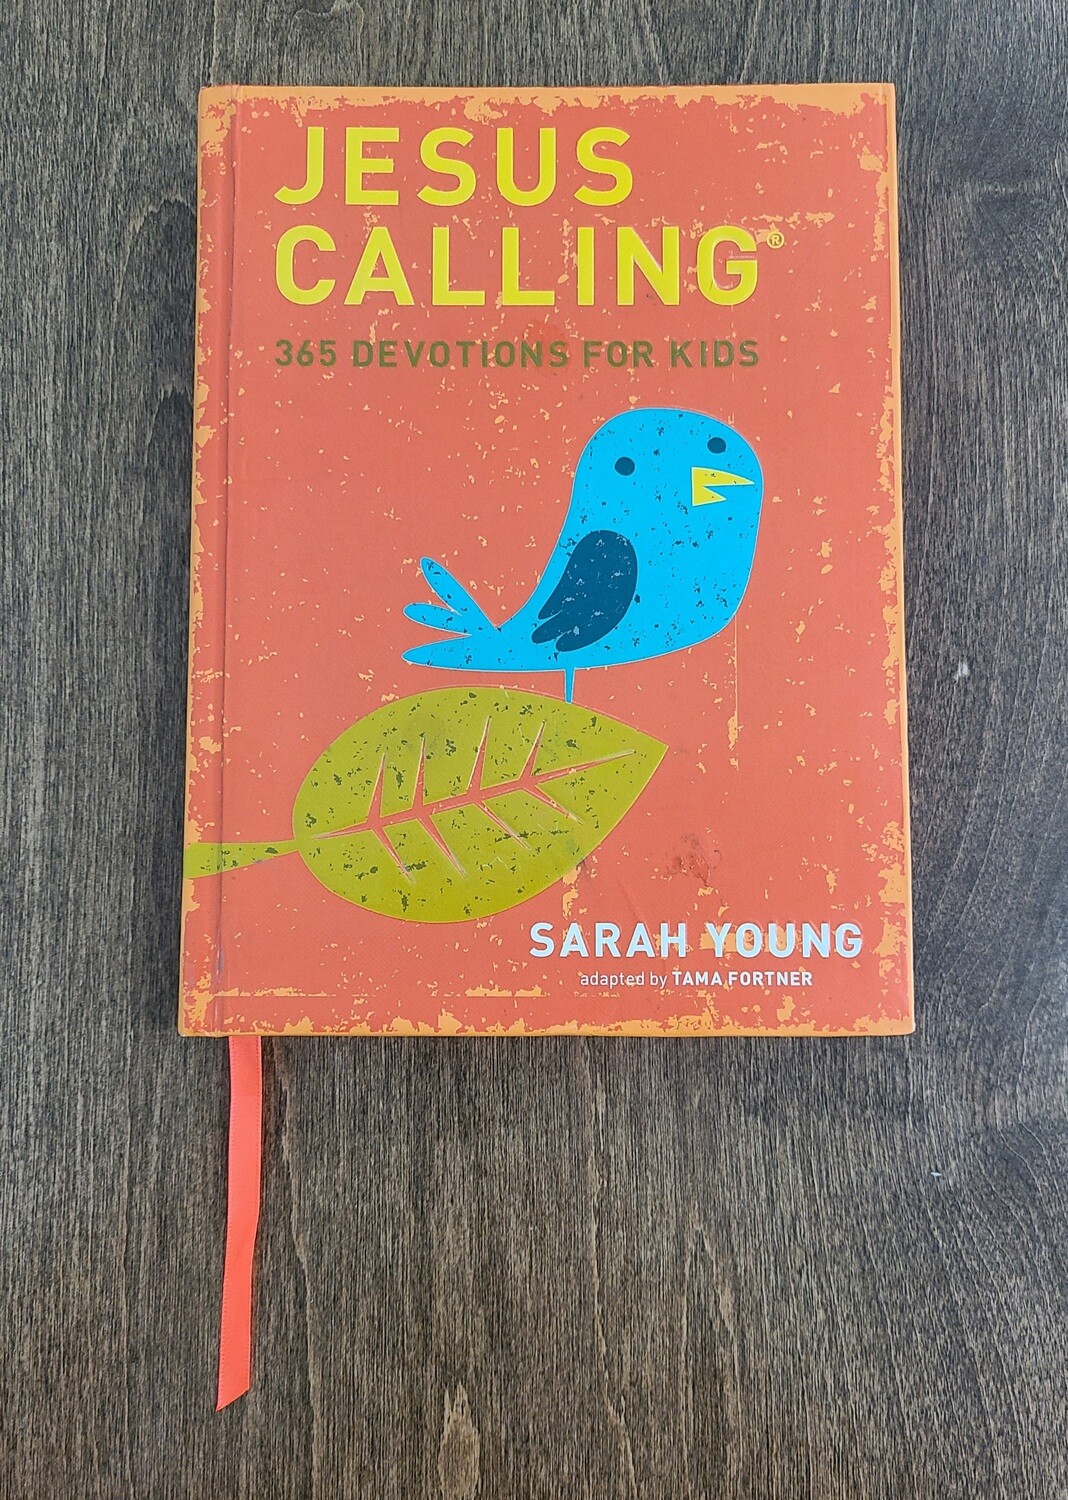 Jesus Calling: 365 Devotions for Kids by Sarah Young and Tama Fortner